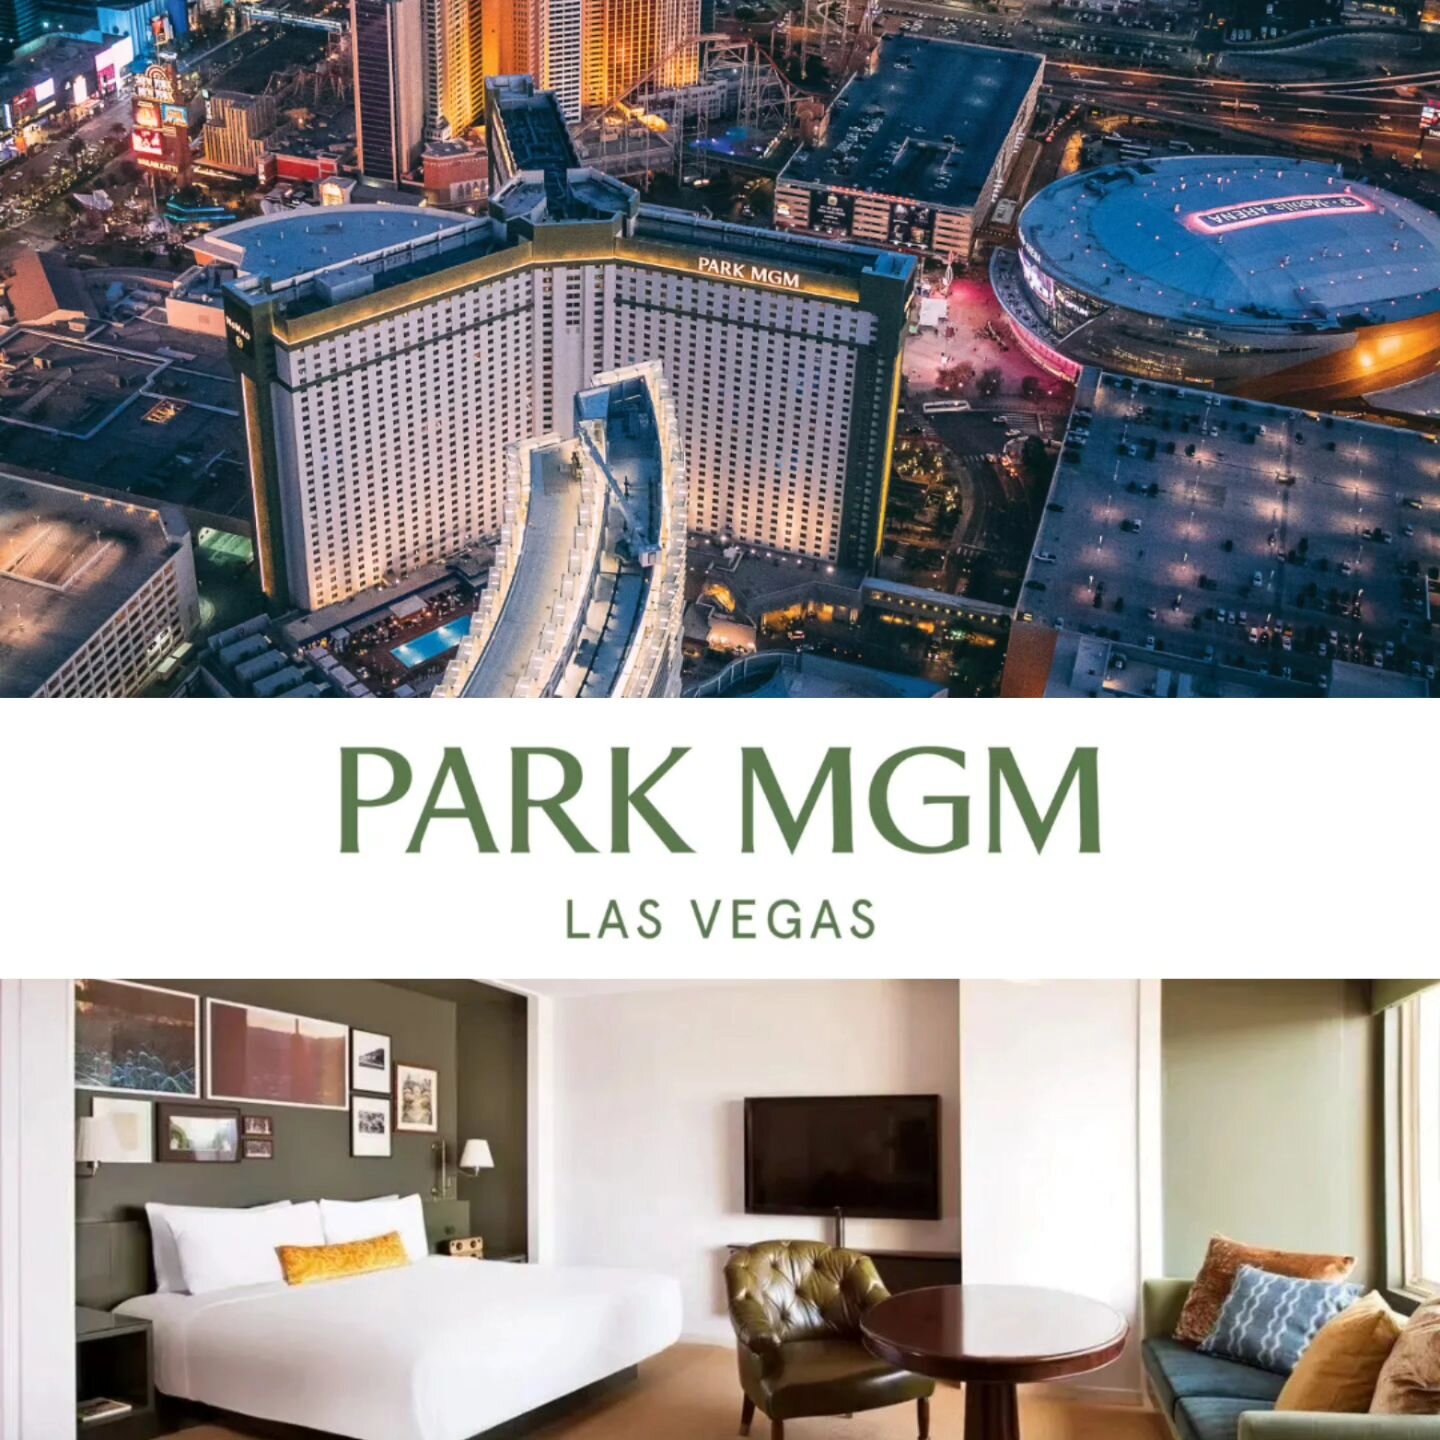 It was a pleasure working with you again this year! Hope Vegas exceeded your expectations. 👍 @gosleeves 

#parkmgm #lasvegas #hotels #travel #booking #travel #events #tradeshows #vegas #vegaslife #hotelroom #hotel #resort